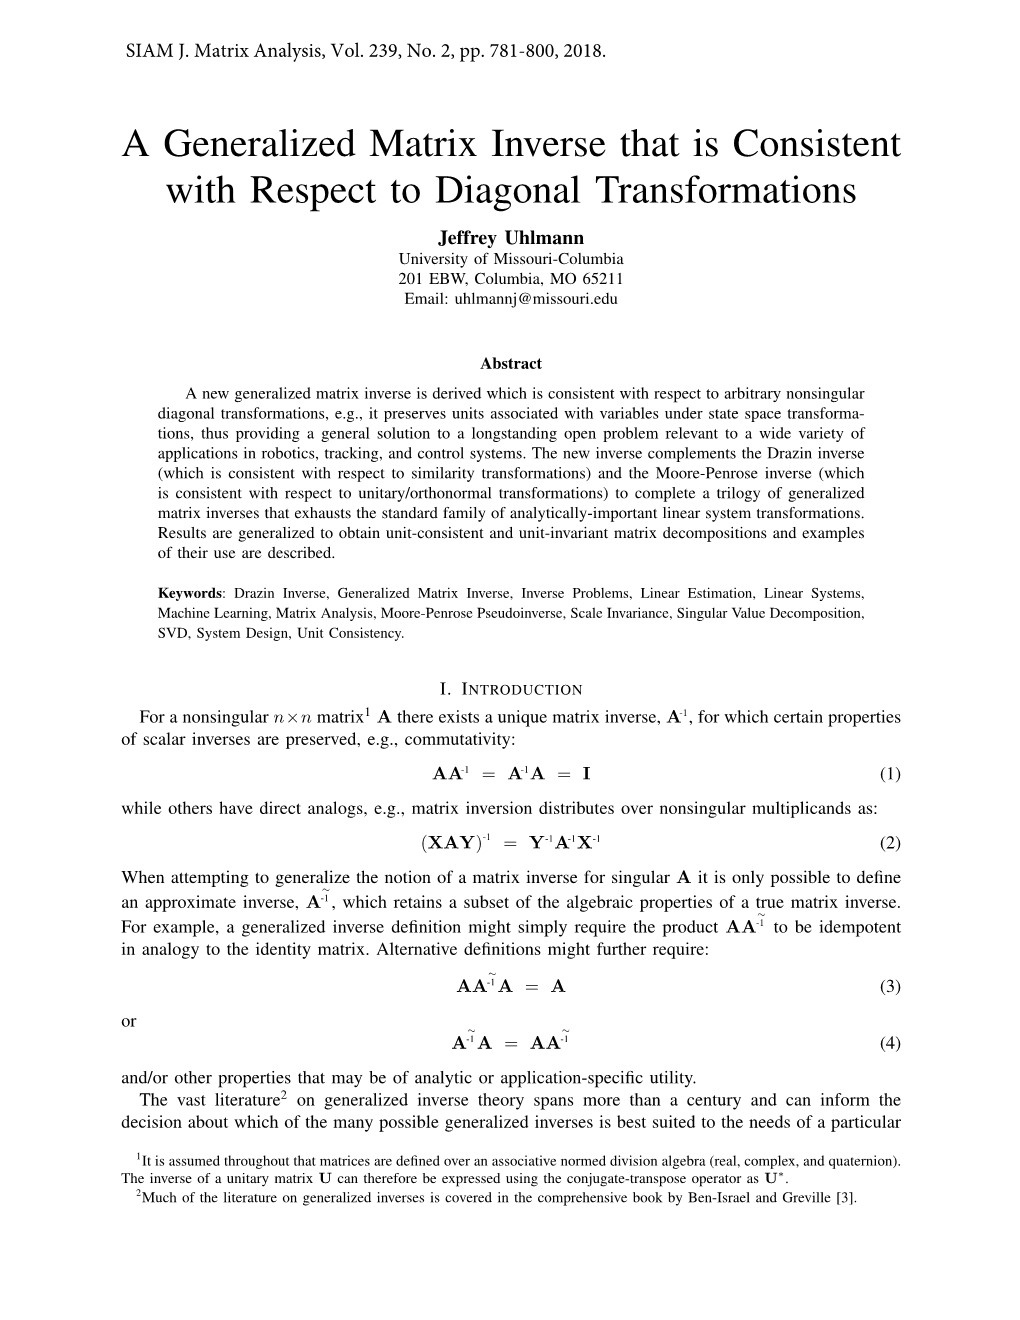 A Generalized Matrix Inverse That Is Consistent with Respect to Diagonal Transformations